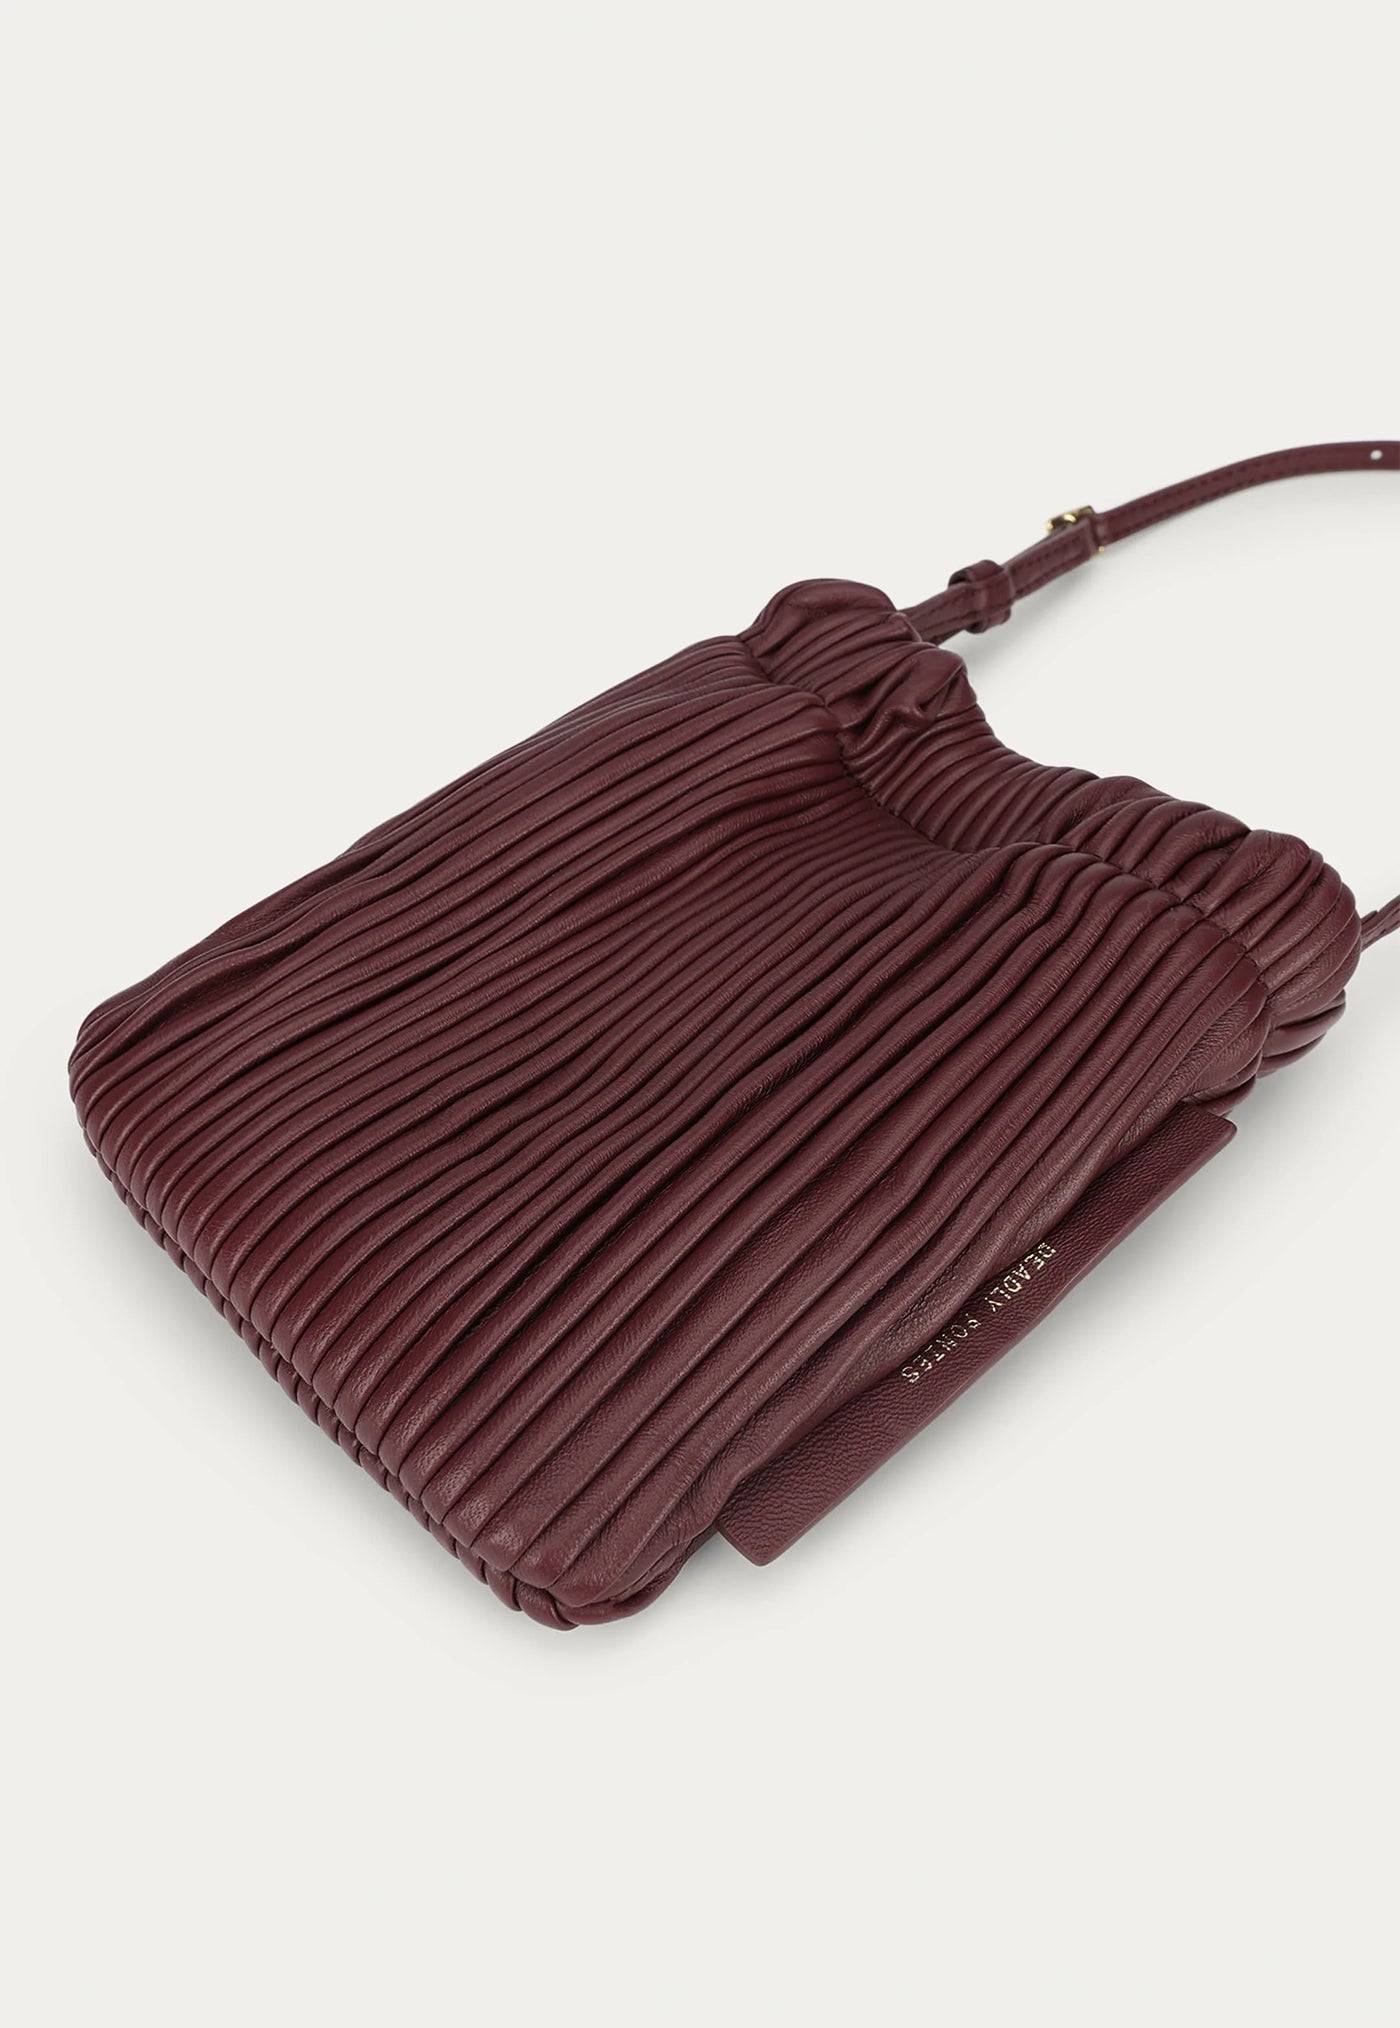 Mr Cinch Pouch - Claret Pleated sold by Angel Divine